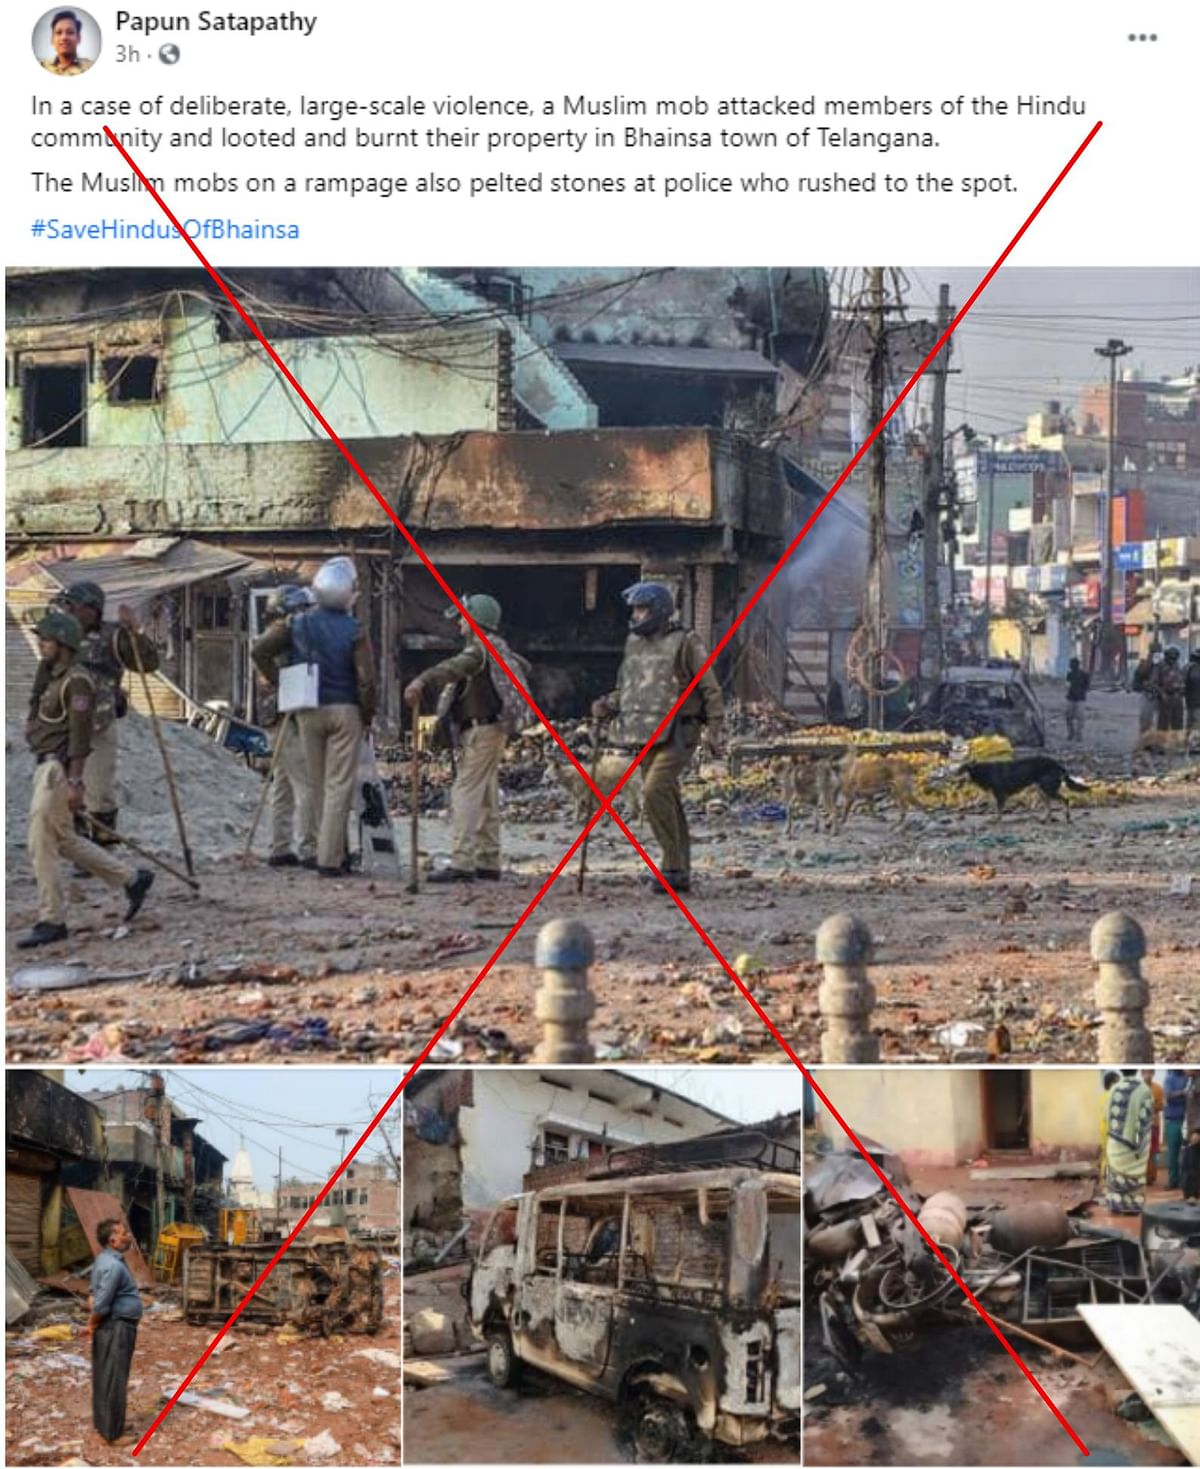 The images are being shared in context of the recent communal clash in Telangana’s Bhainsa.